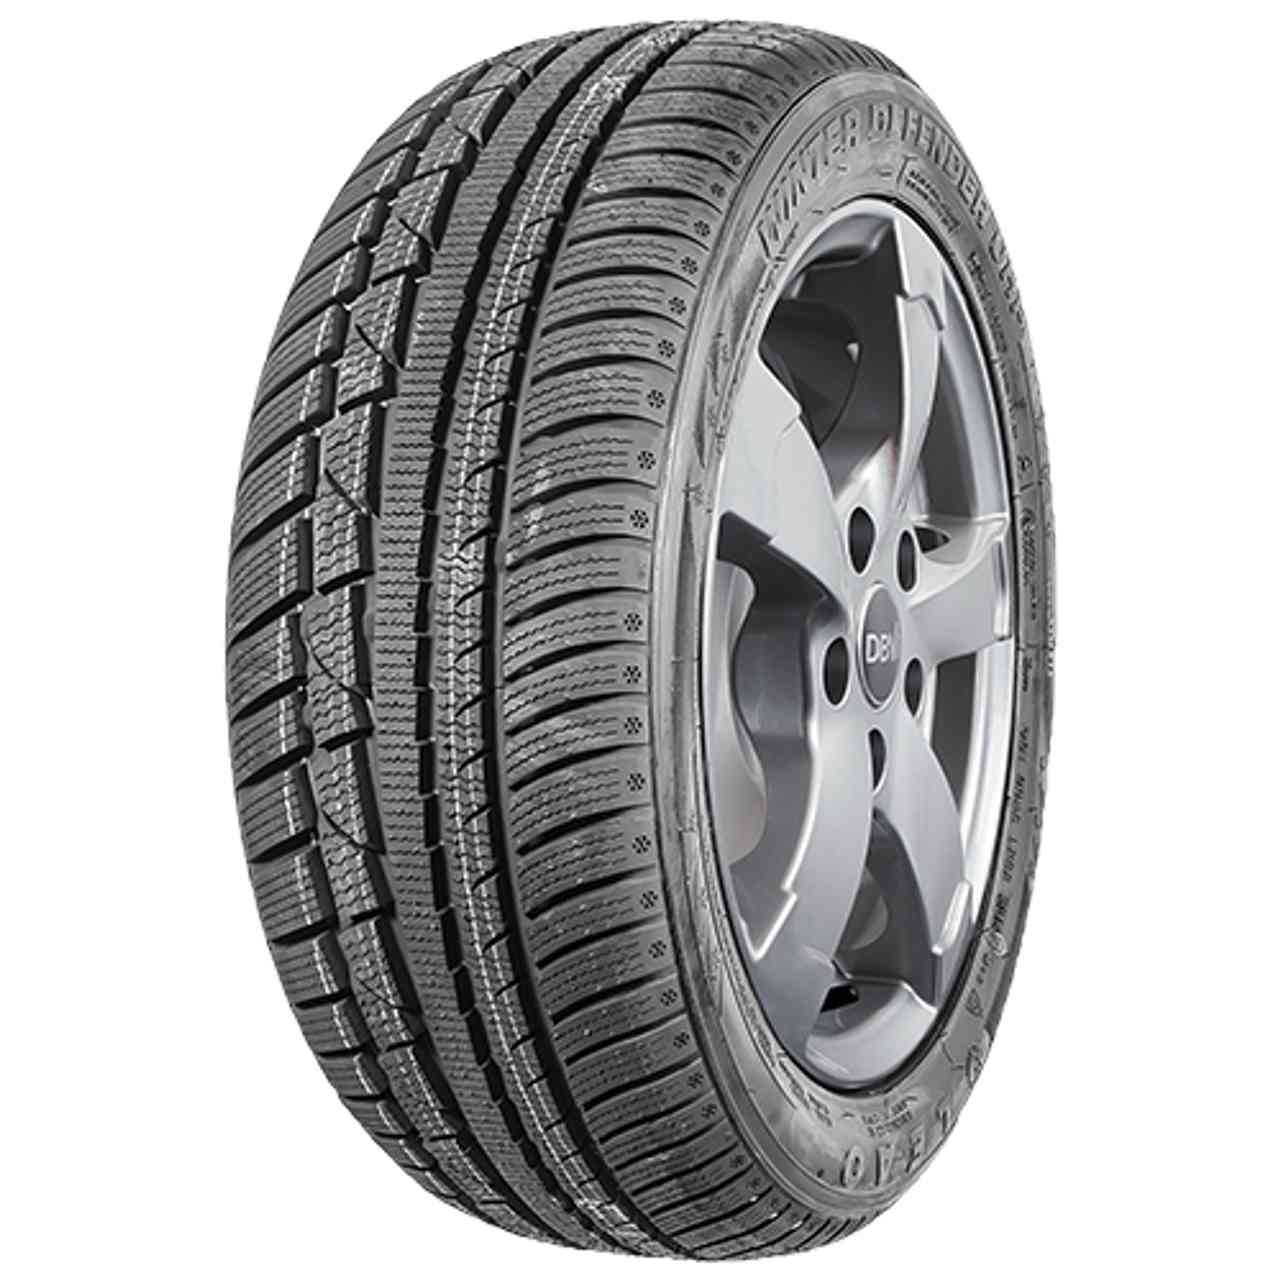 LEAO WINTER DEFENDER UHP 195/55R16 91H BSW